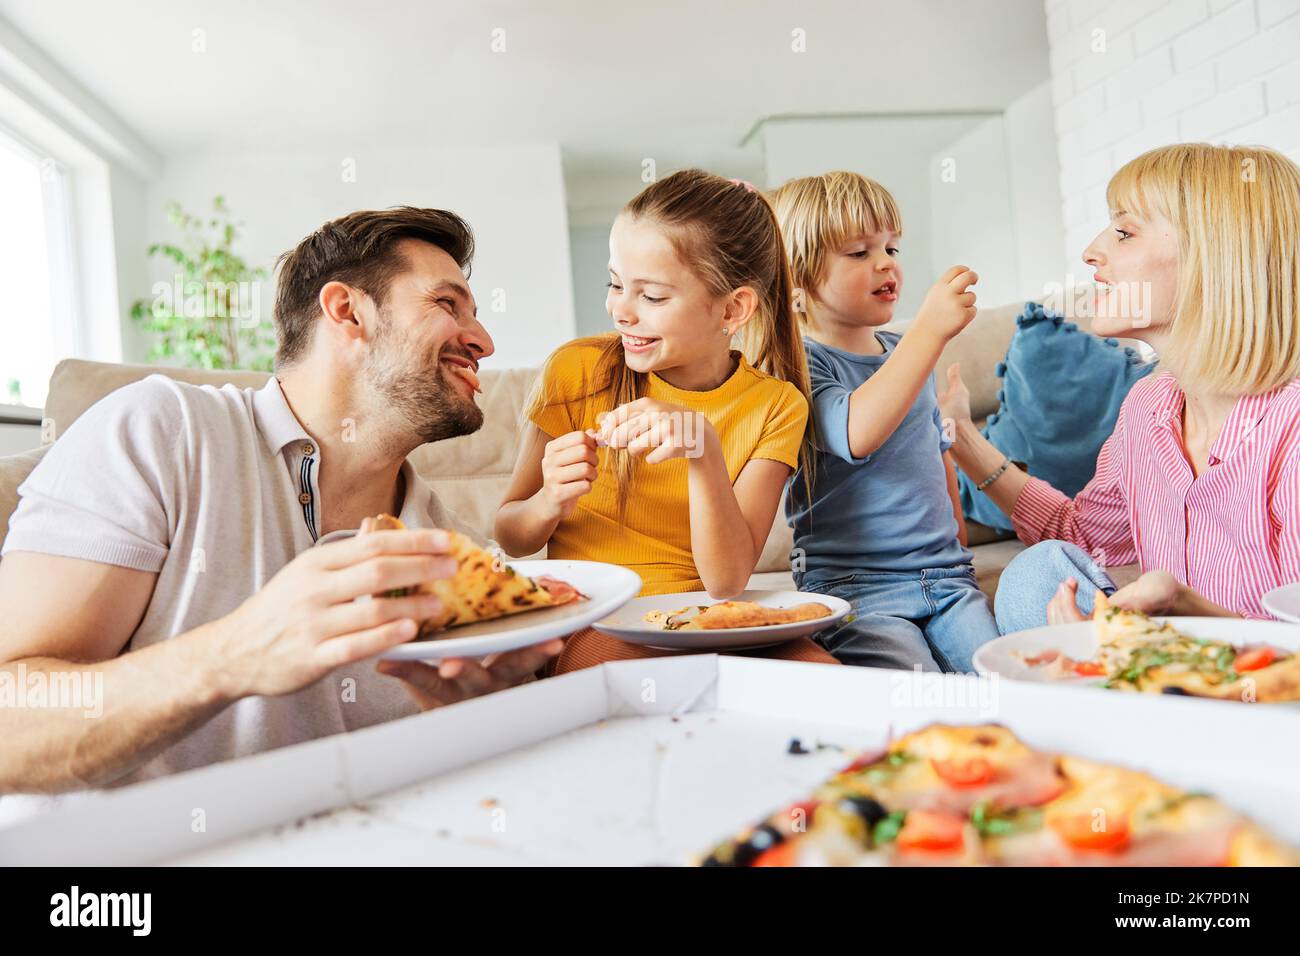 pizza family child food home eating son daughter mother father happy meal together lunch dinner man woman boy girl fun Stock Photo